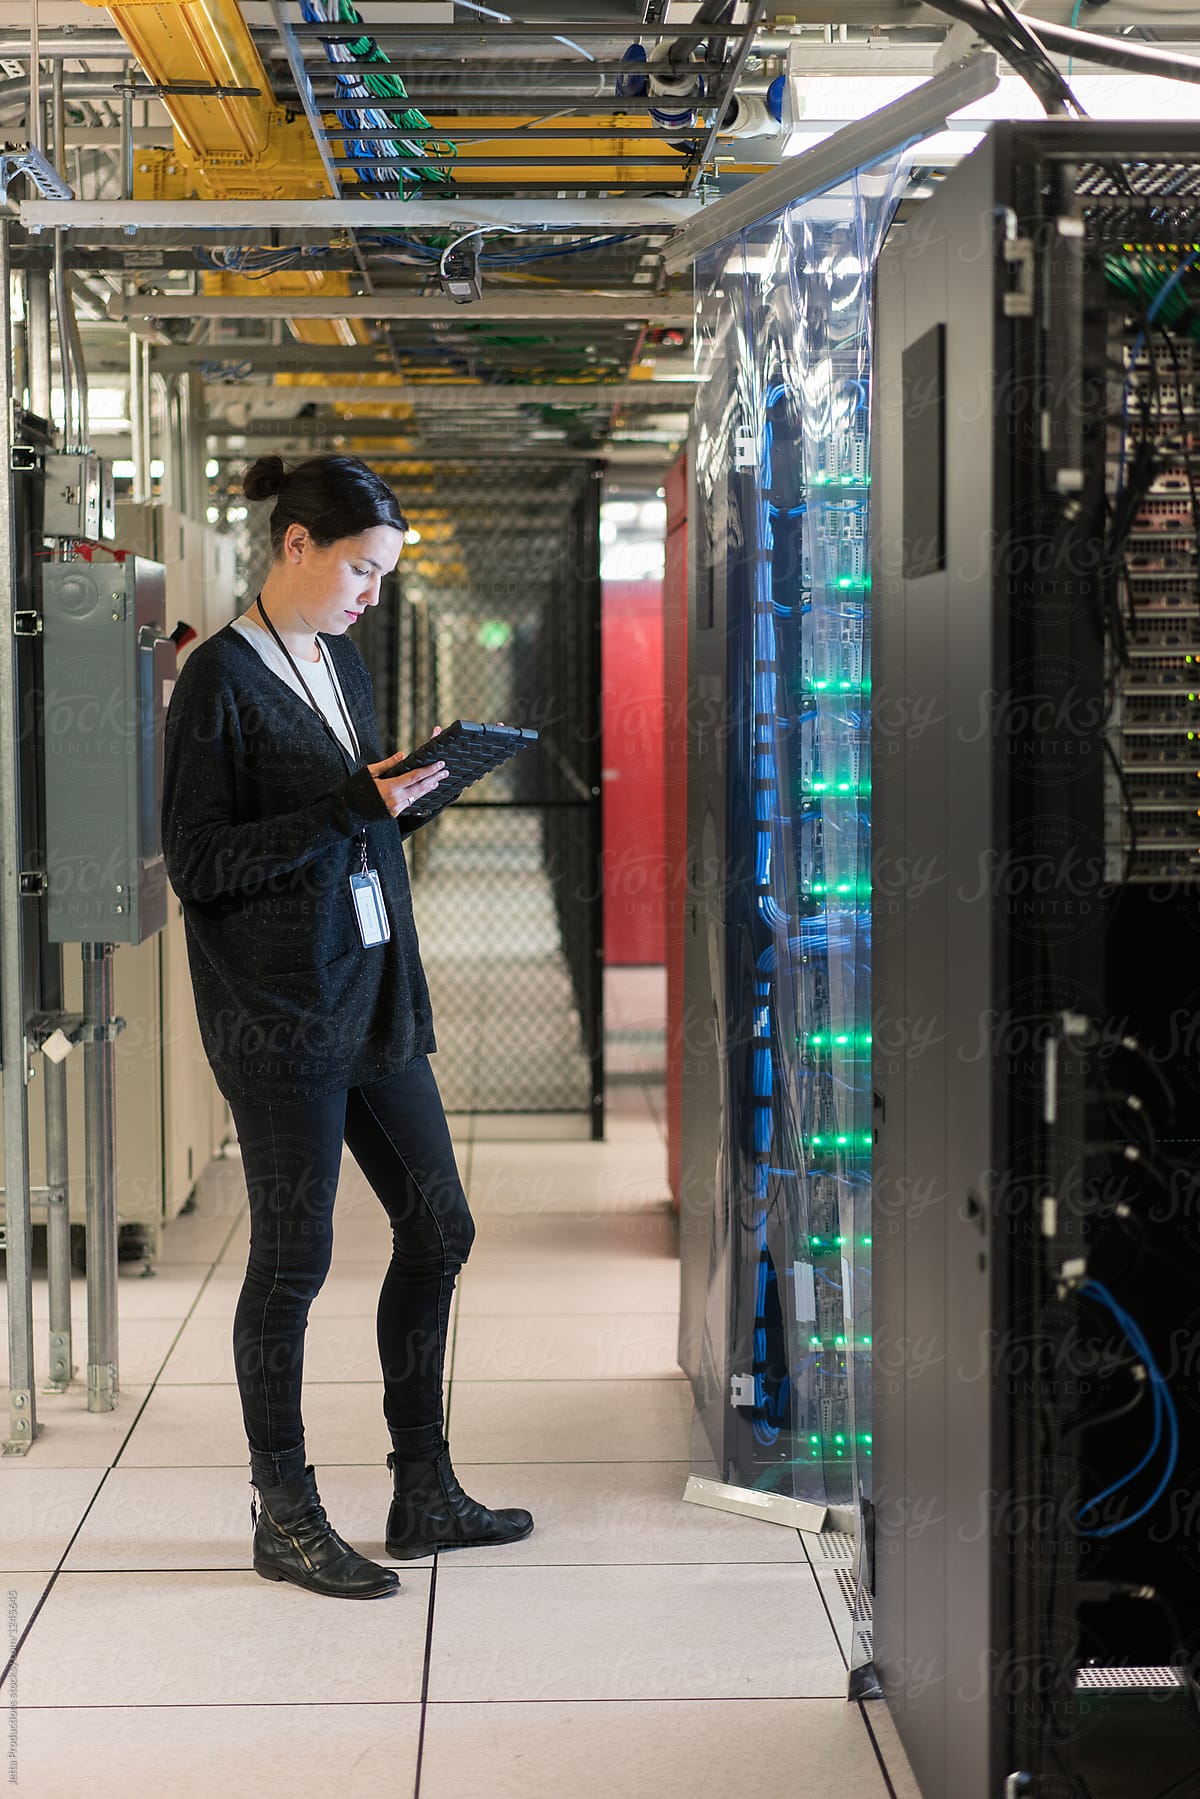 Young woman in a server room looks down at her digital tablet